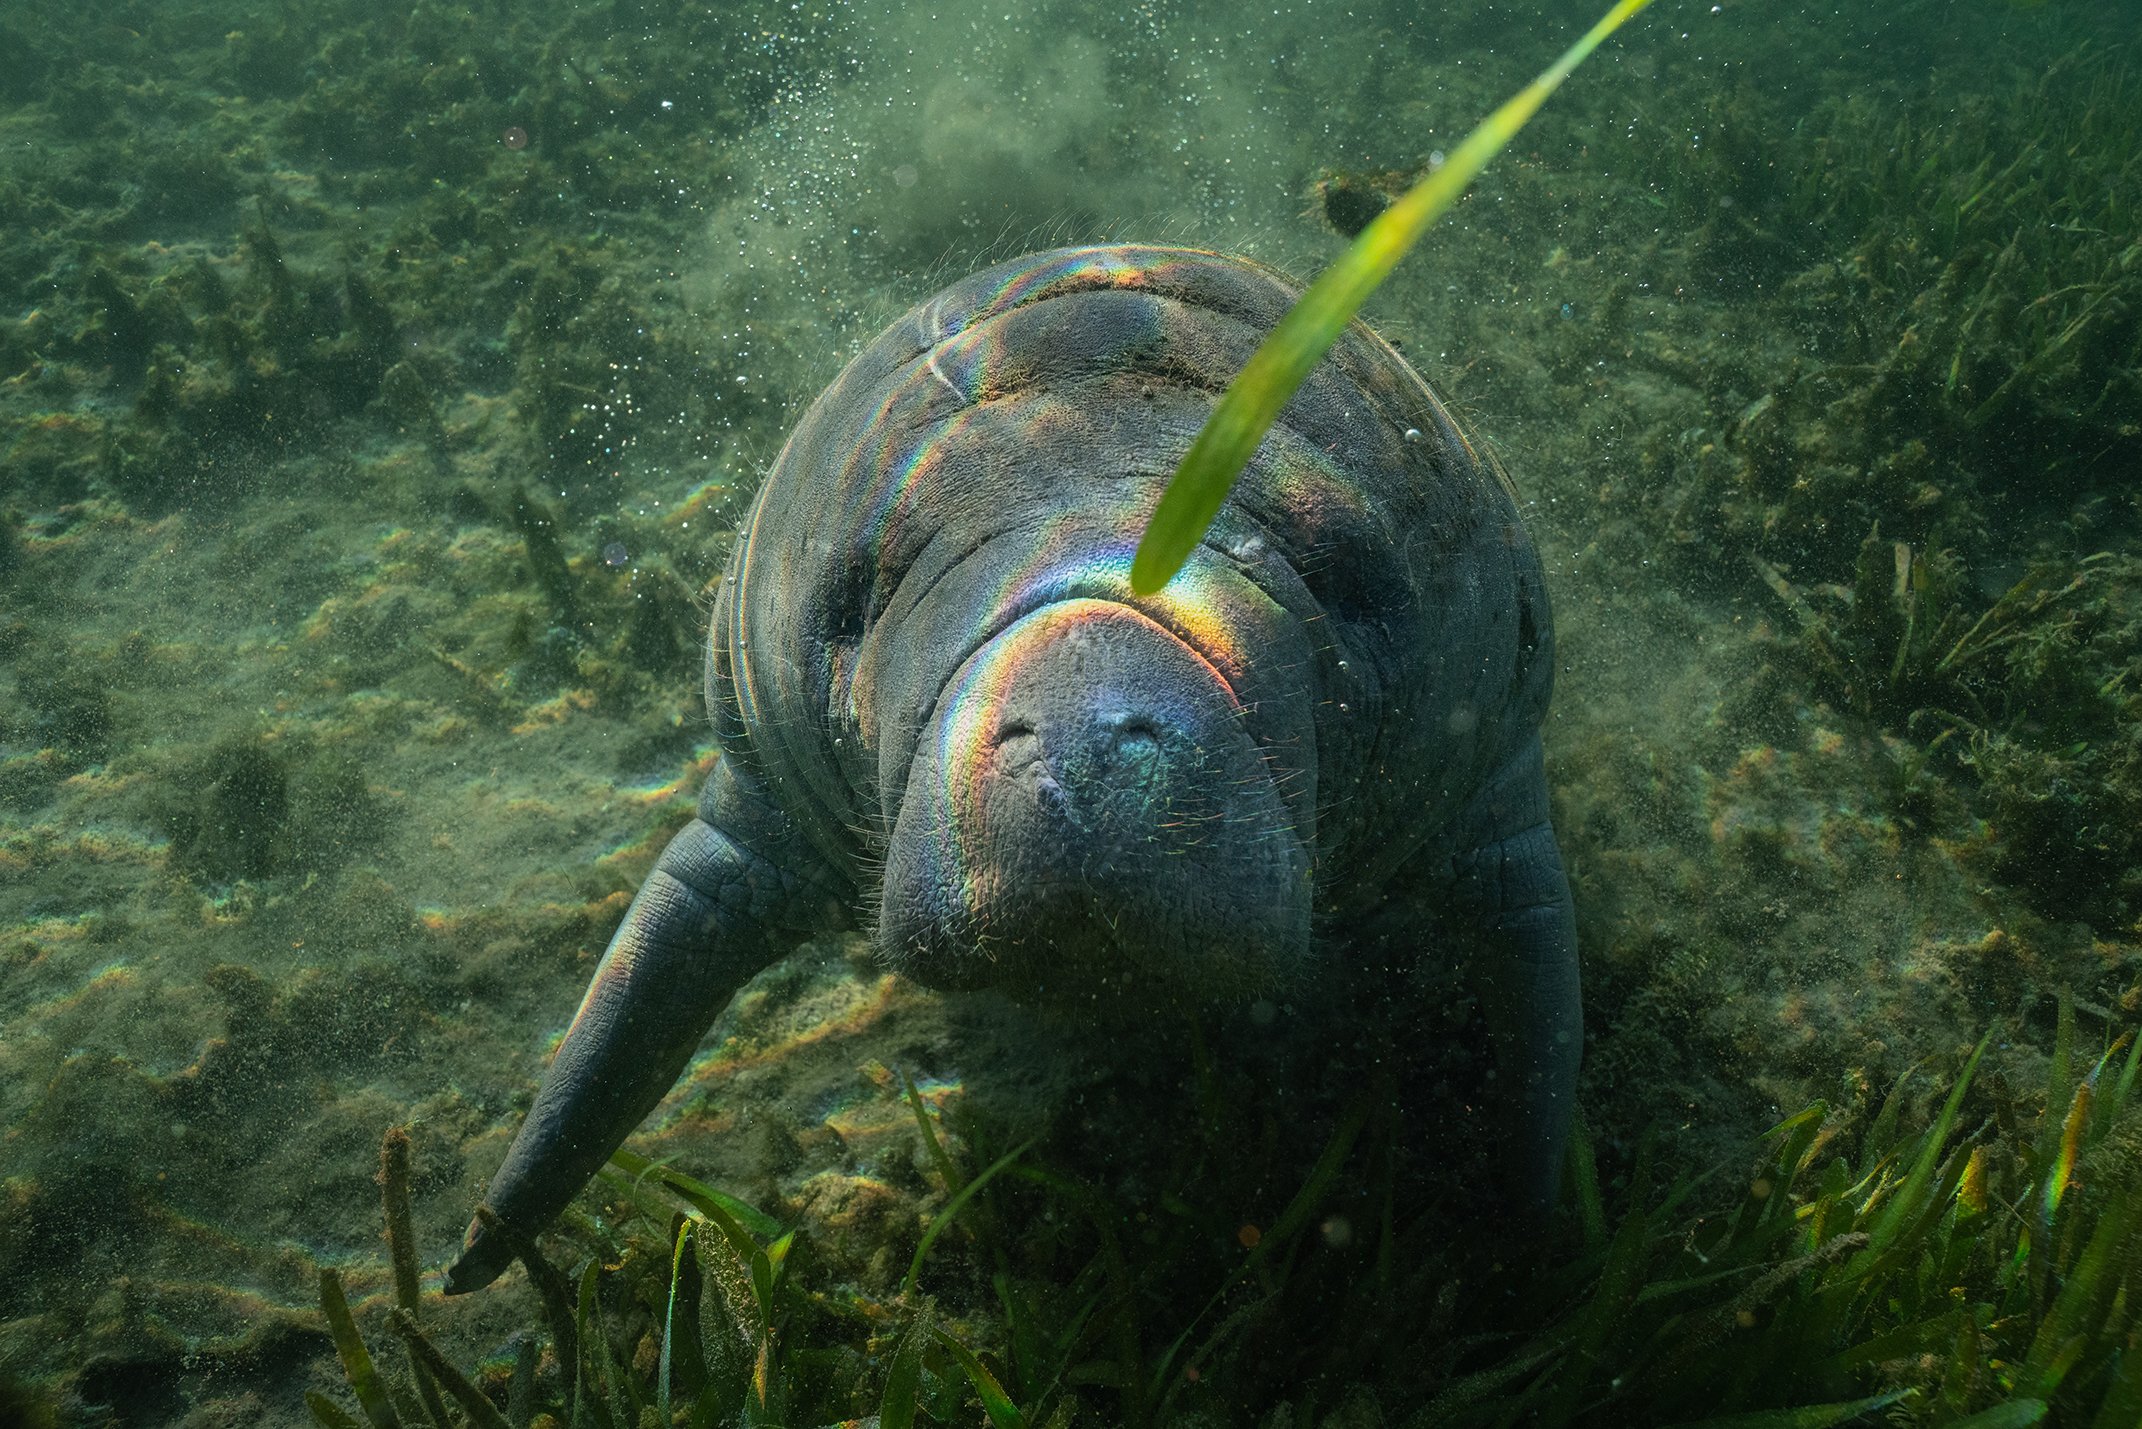   Shortly after slipping into the water this baby manatee swam straight up to me and put its face up to my face and the moment that I looked into its eyes I knew that I was in the right place doing exactly what I’m supposed to be doing. Then the unex